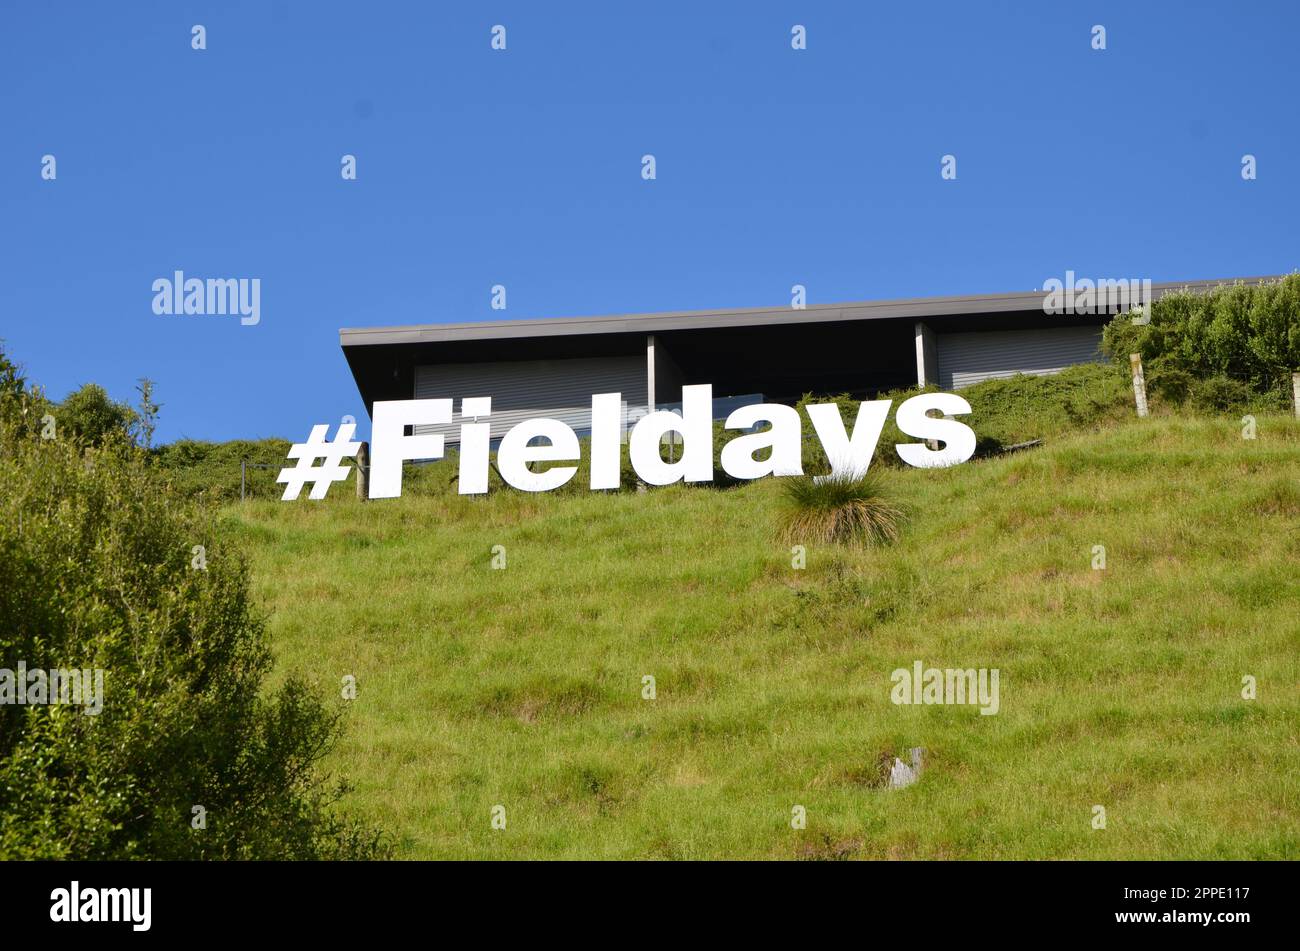 Hashtag Fieldays Sign - The Southern Hemisphere's Largest Agricultural Annual Event. Stock Photo